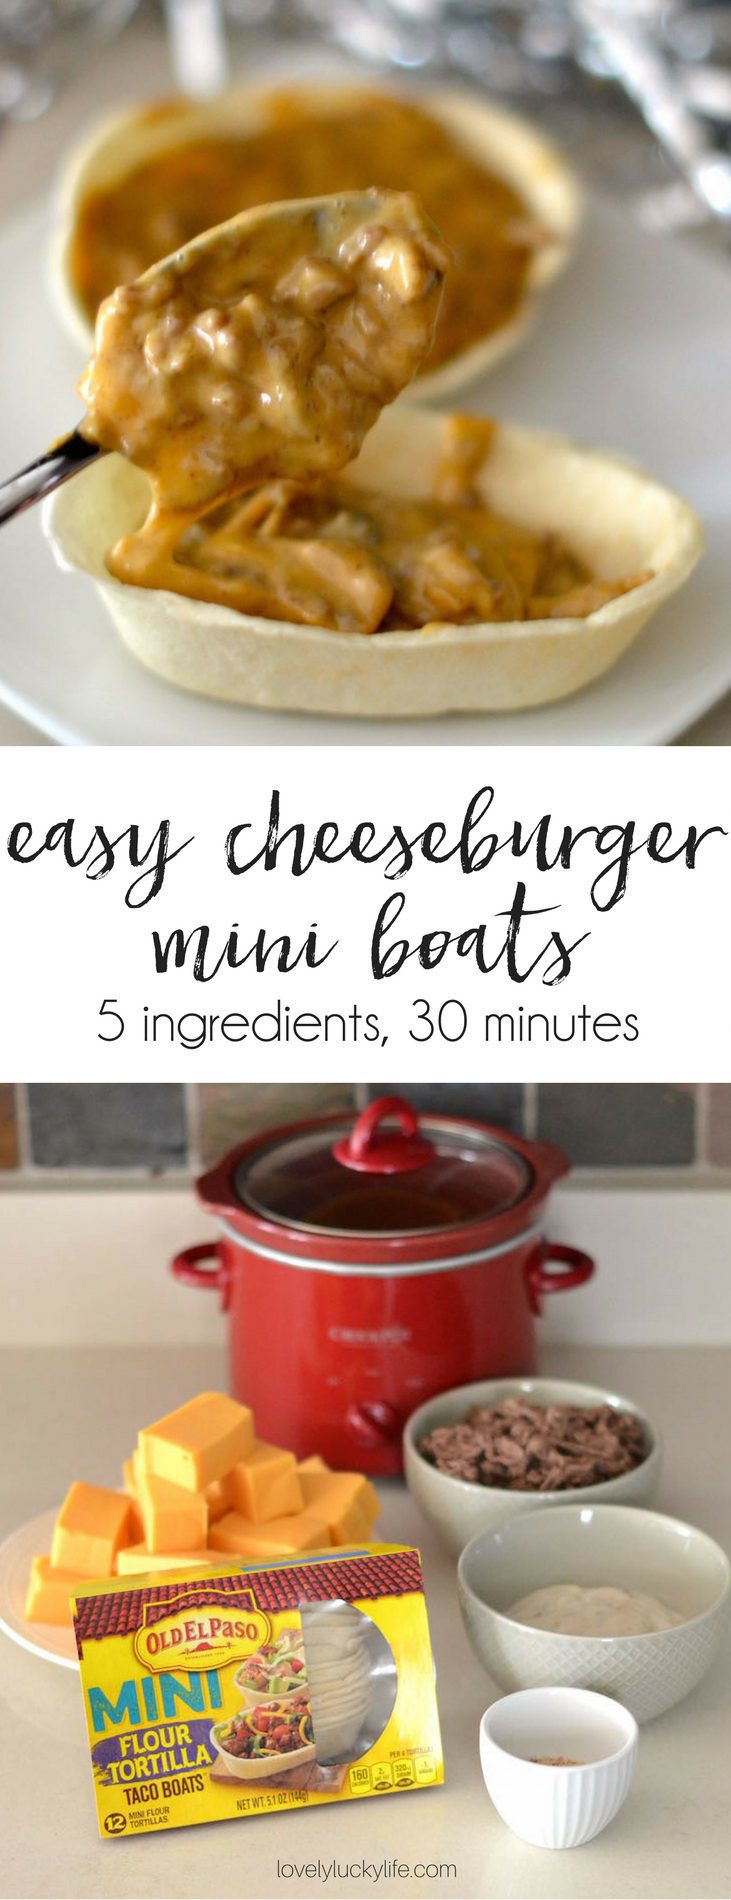 this is the best game day snack - 5 ingredient easy cheeseburger dip in Old El Paso mini taco boats. tastes just like White Castle!